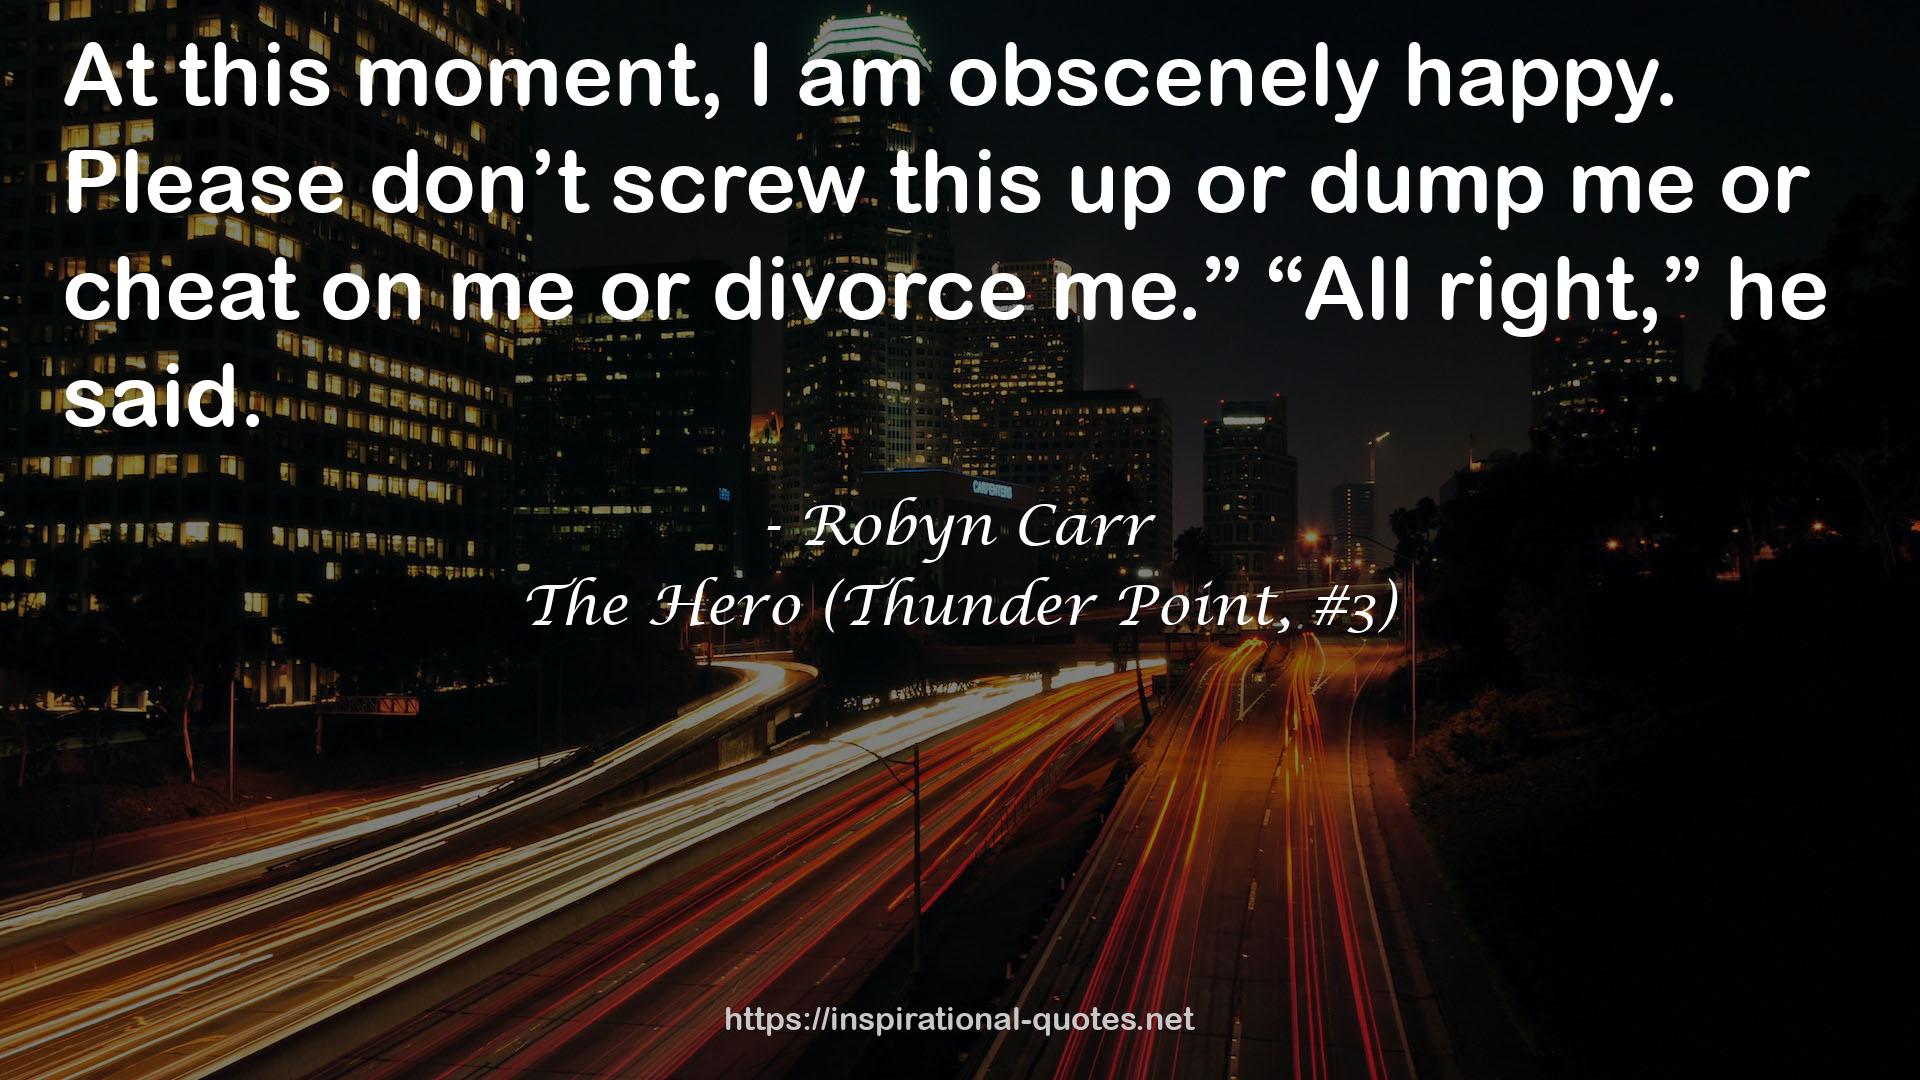 Robyn Carr QUOTES